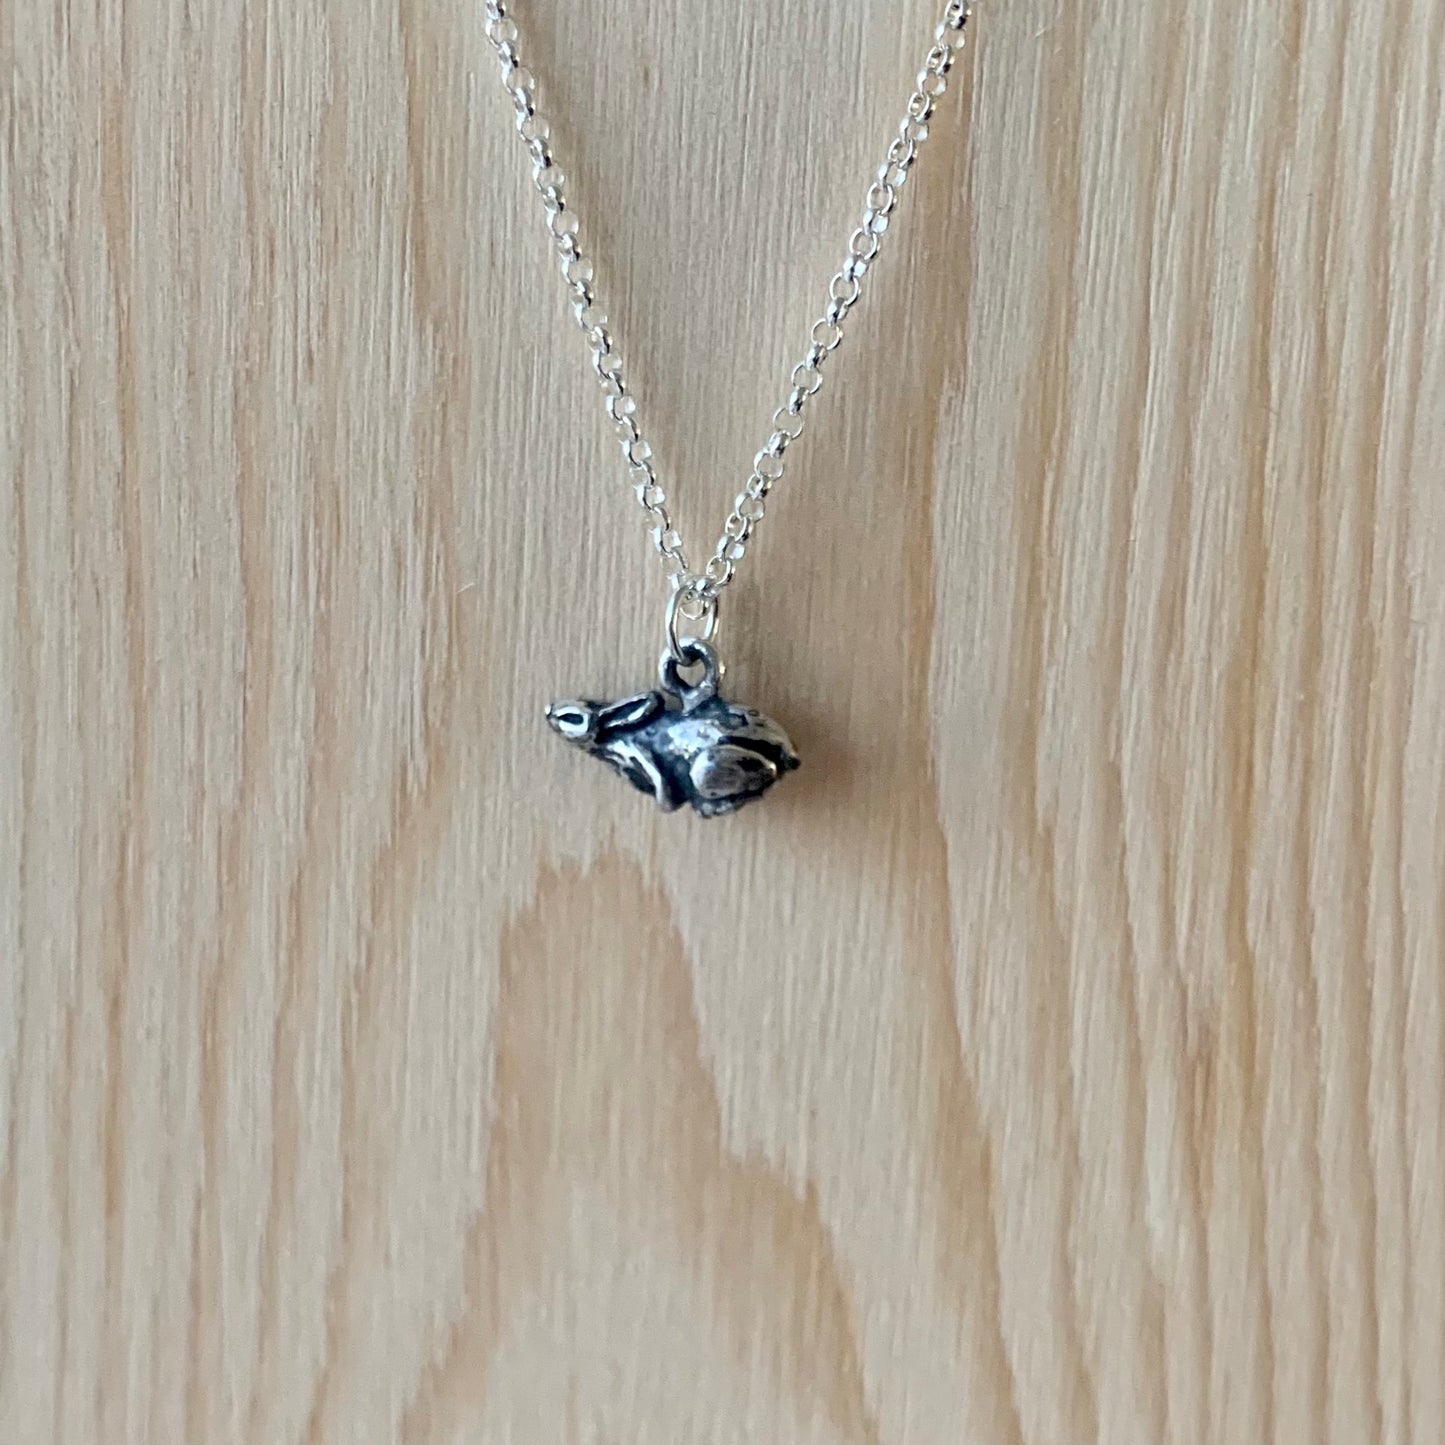 Unmarked Industries Baby Bunny Necklace